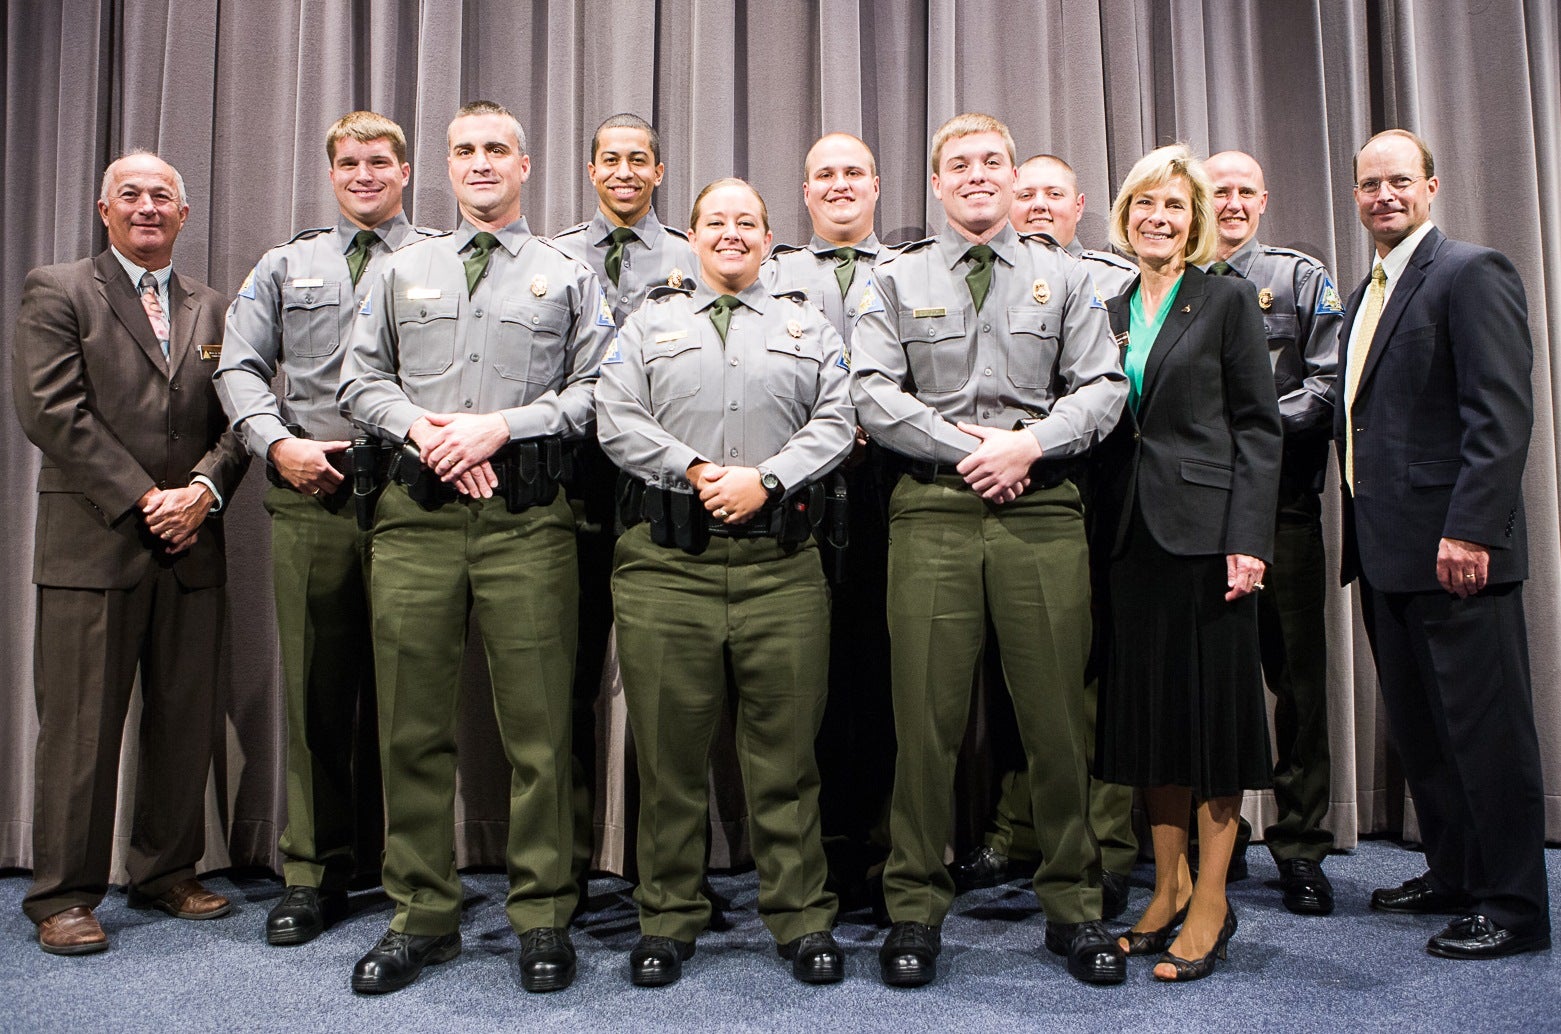 Pictured the new conservation agent class of 2015.